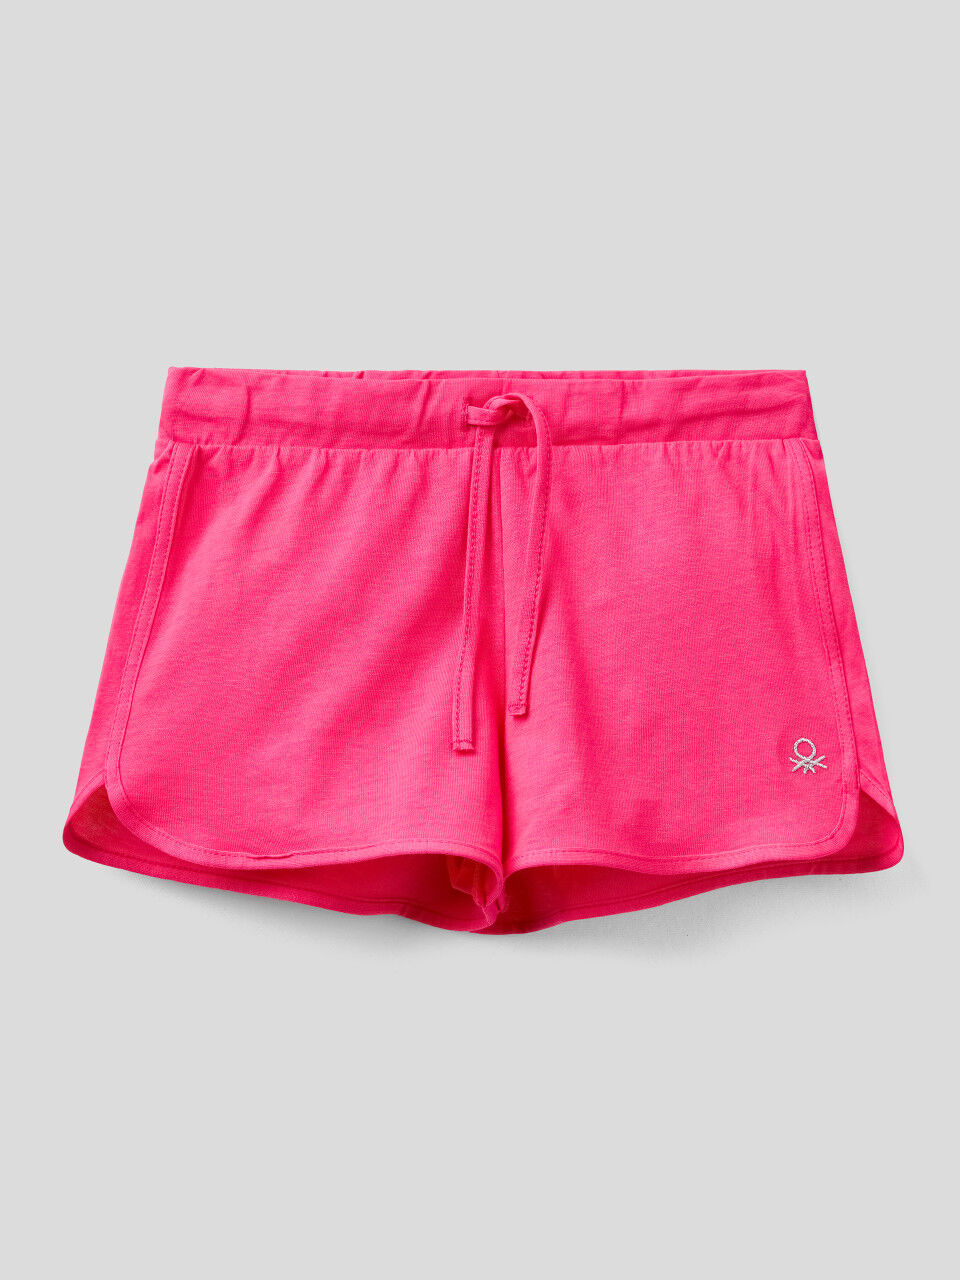 United Colors of Benetton Short Fille 